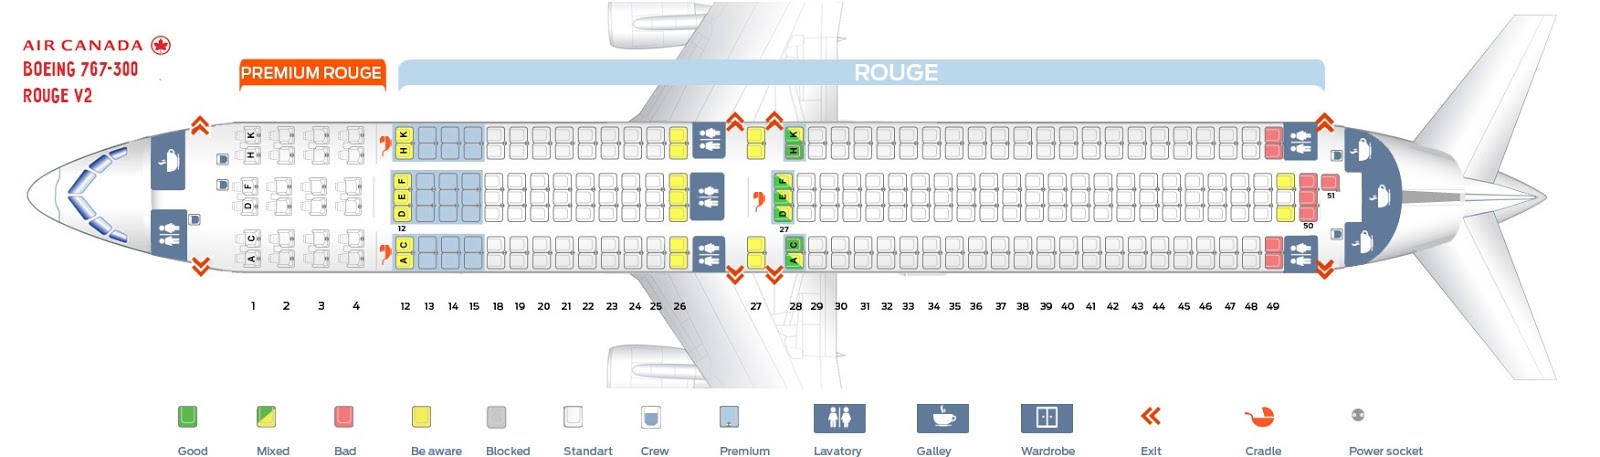 Air Canada Airline Seating Chart